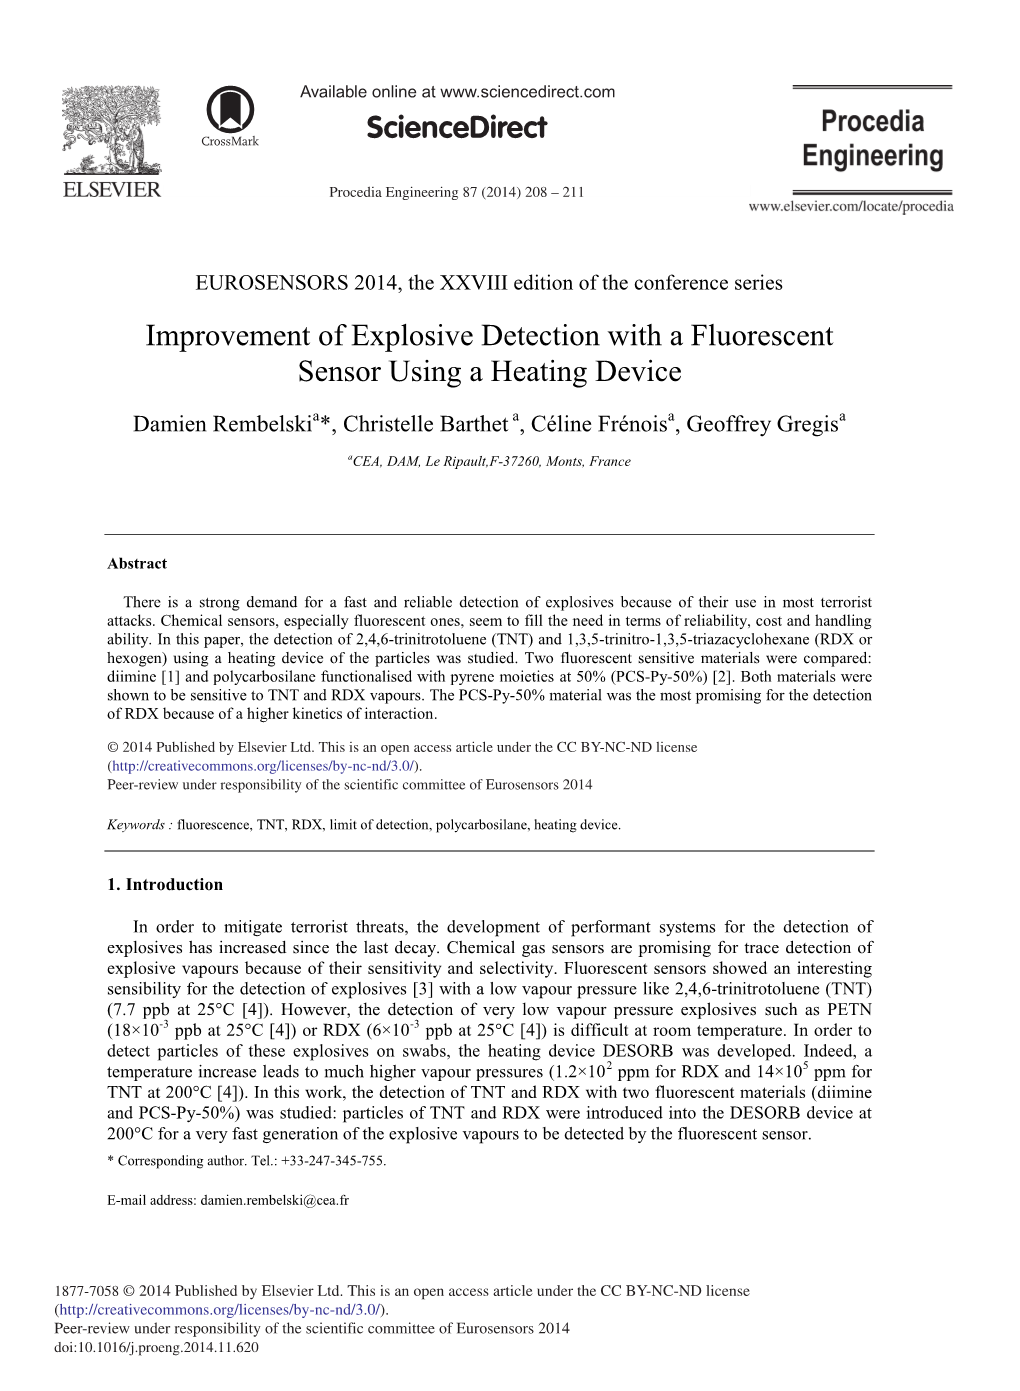 Improvement of Explosive Detection with a Fluorescent Sensor Using a Heating Device